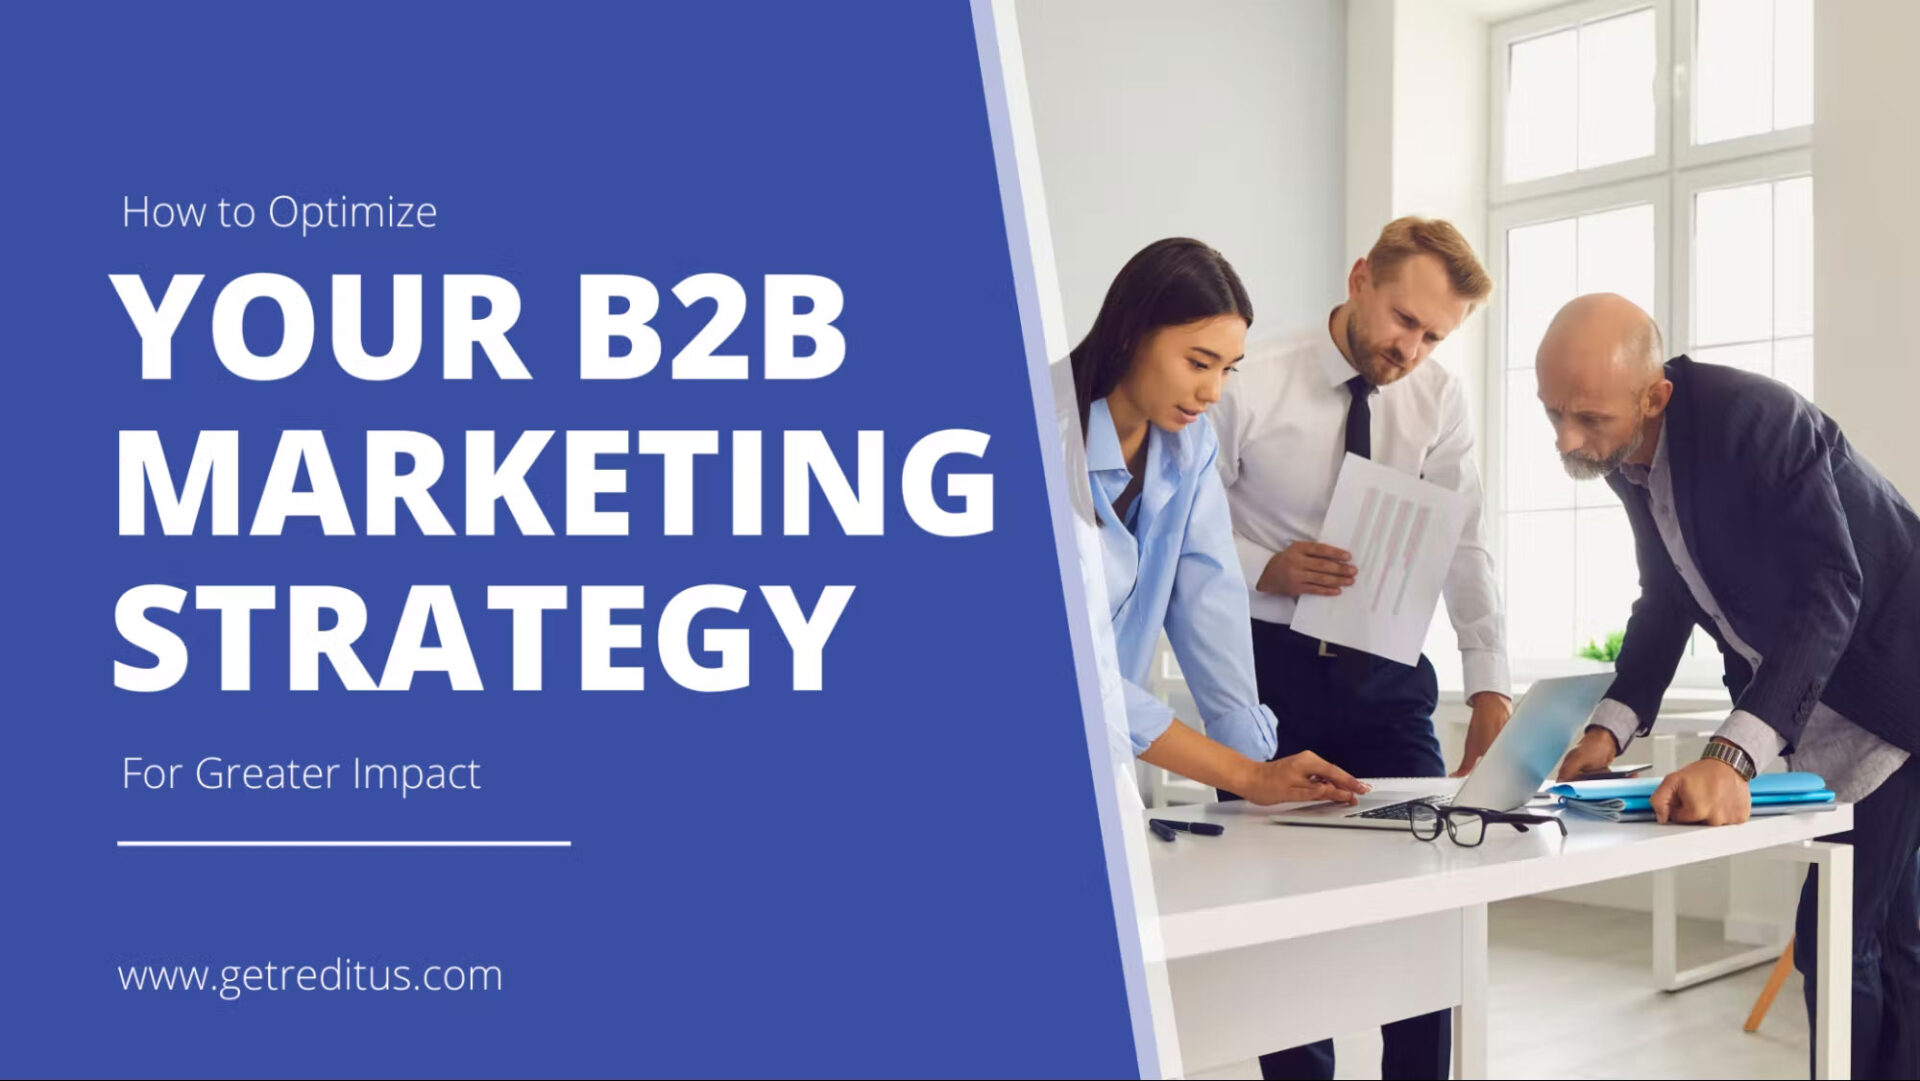 The Ultimate Guide to Optimizing Your B2B Marketing Strategy.